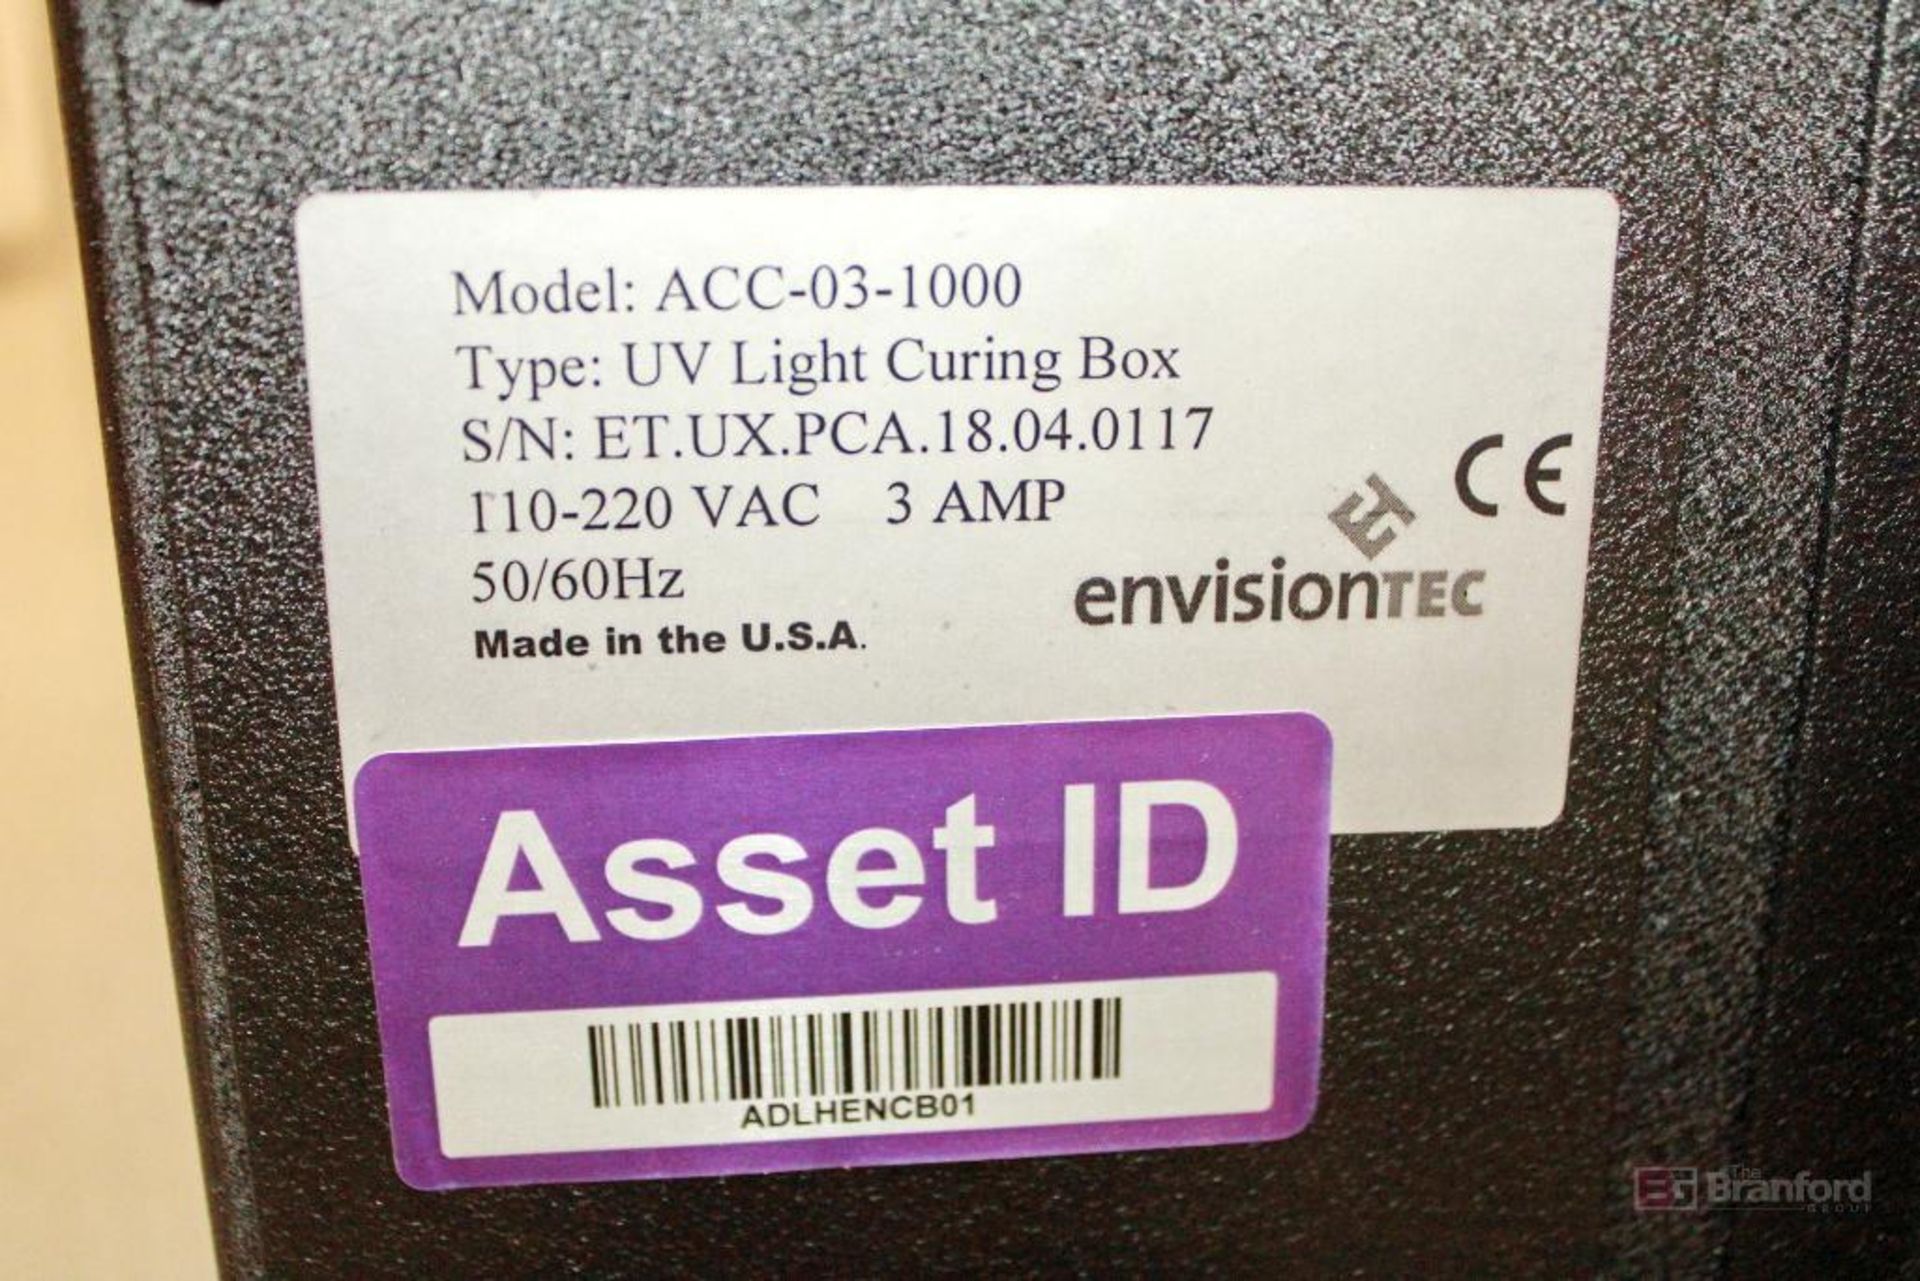 EnvisionTEC Curing Box, Model ACC-03-1000 - Image 3 of 3